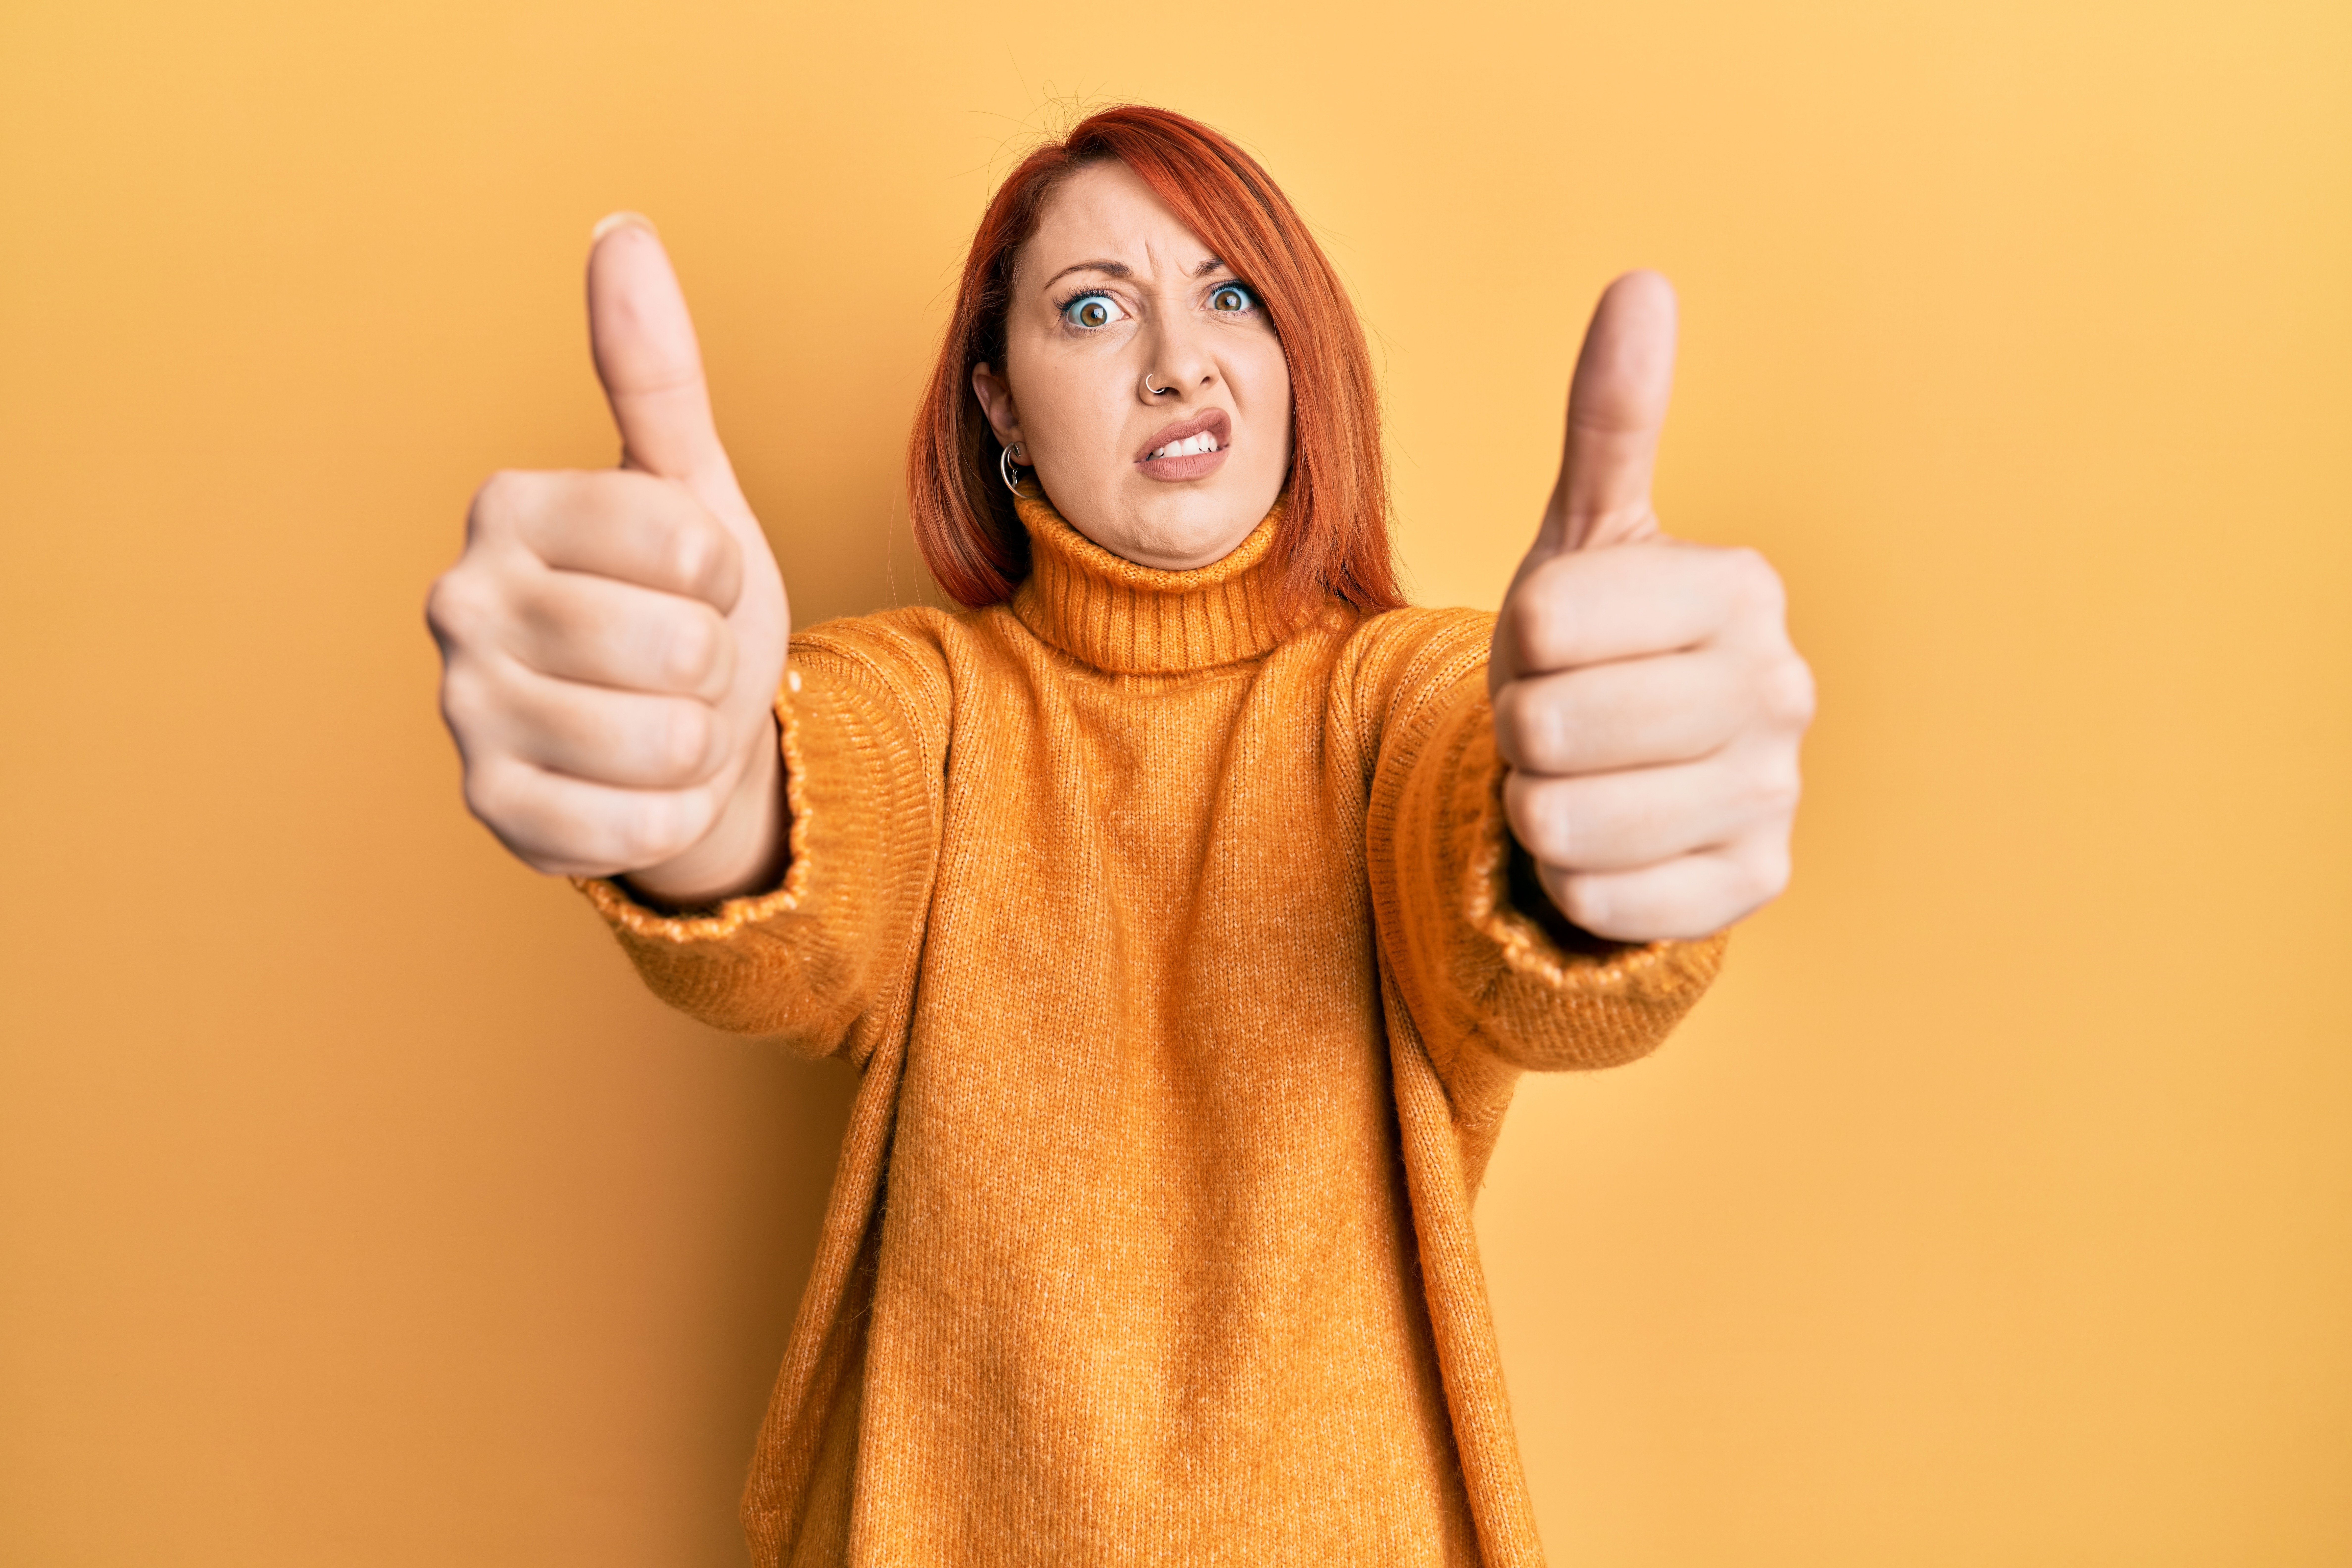 woman doing thumbs up positive gesture in shock face, looking skeptical and sarcastic, surprised with open mouth